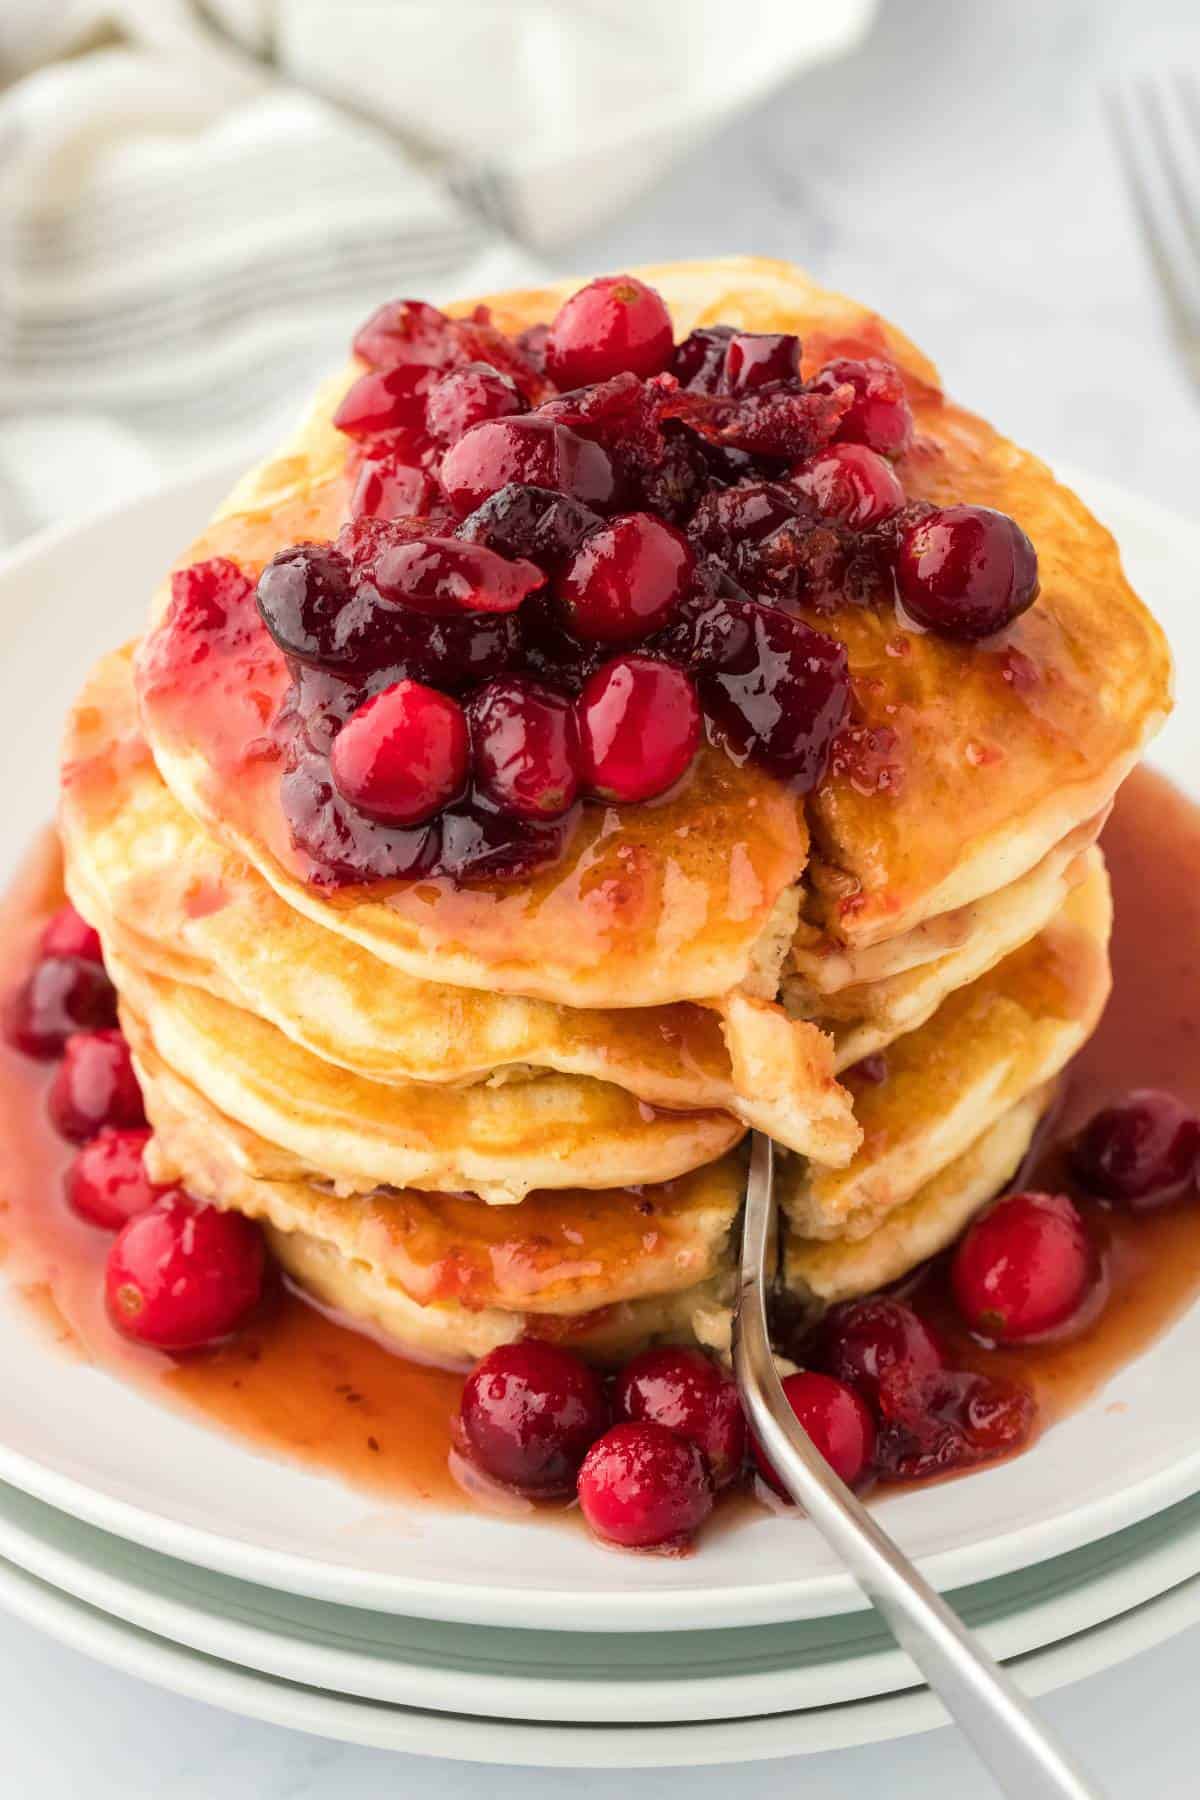 Eggnog Pancakes recipe sliced into sitting on a white plate topped with cranberries for the holiday season.